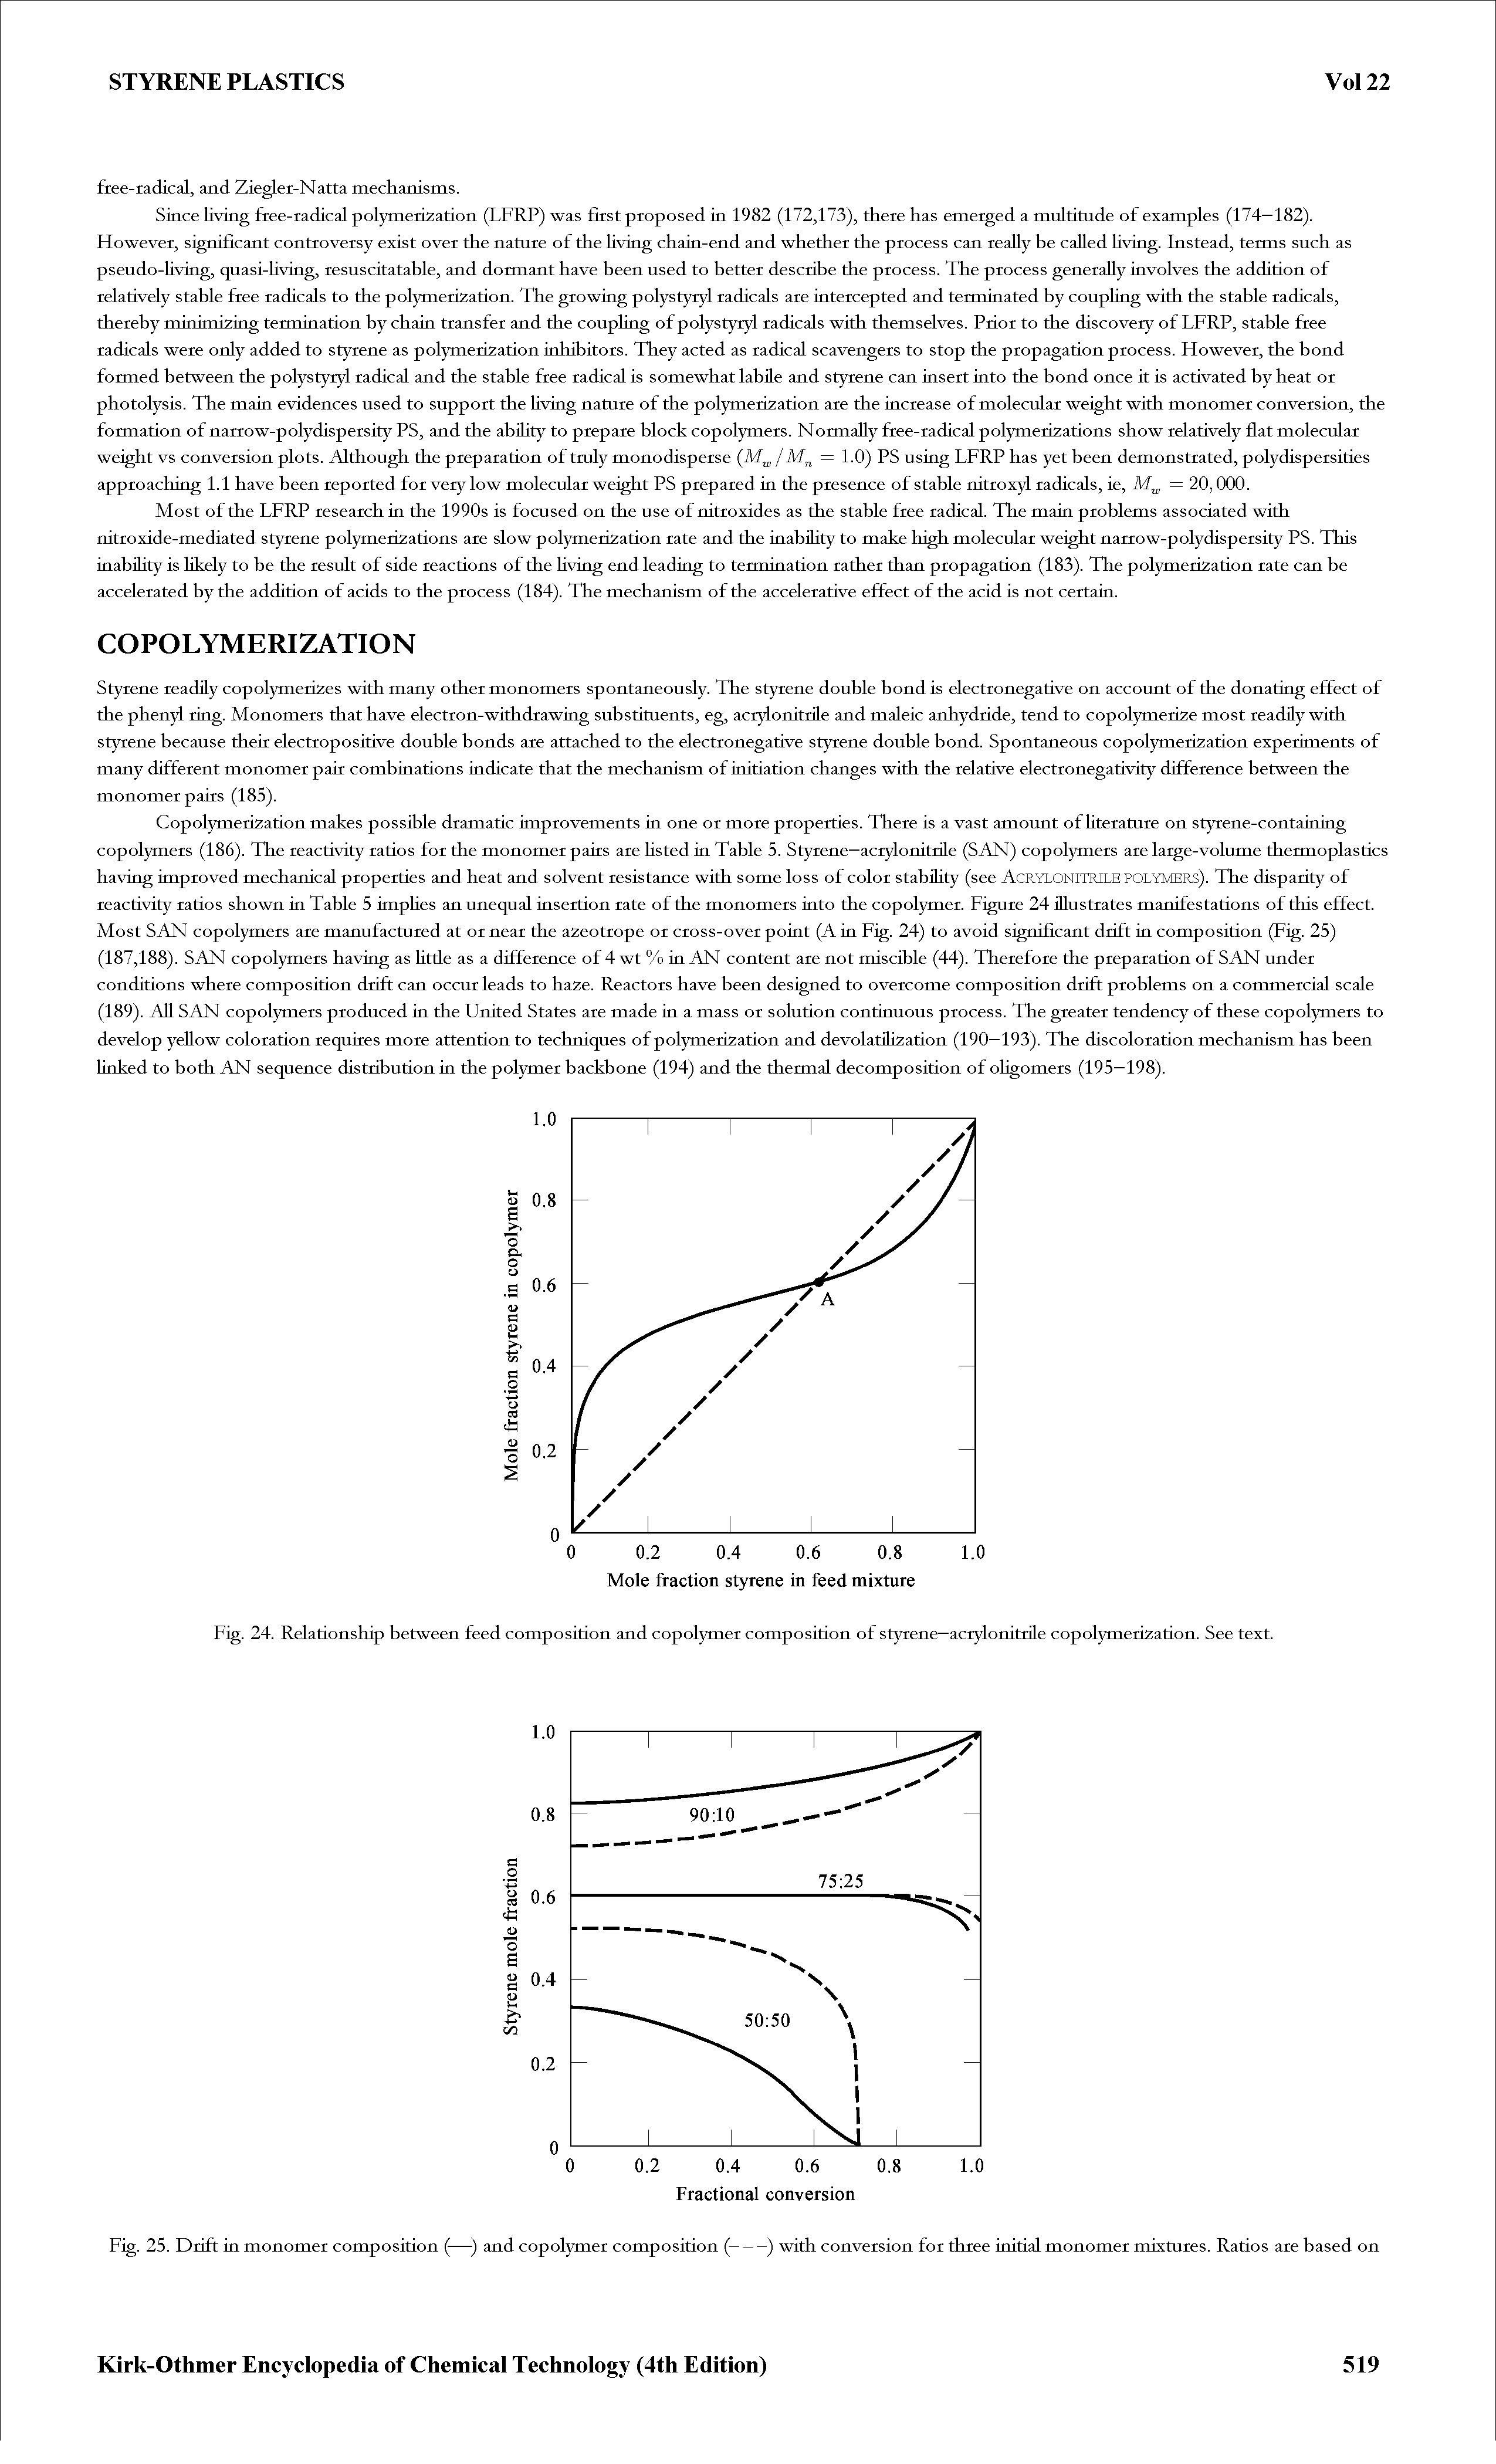 Fig. 24. Relationship between feed composition and copolymer composition of styrene—acrylonitrile copolymerization. See text.